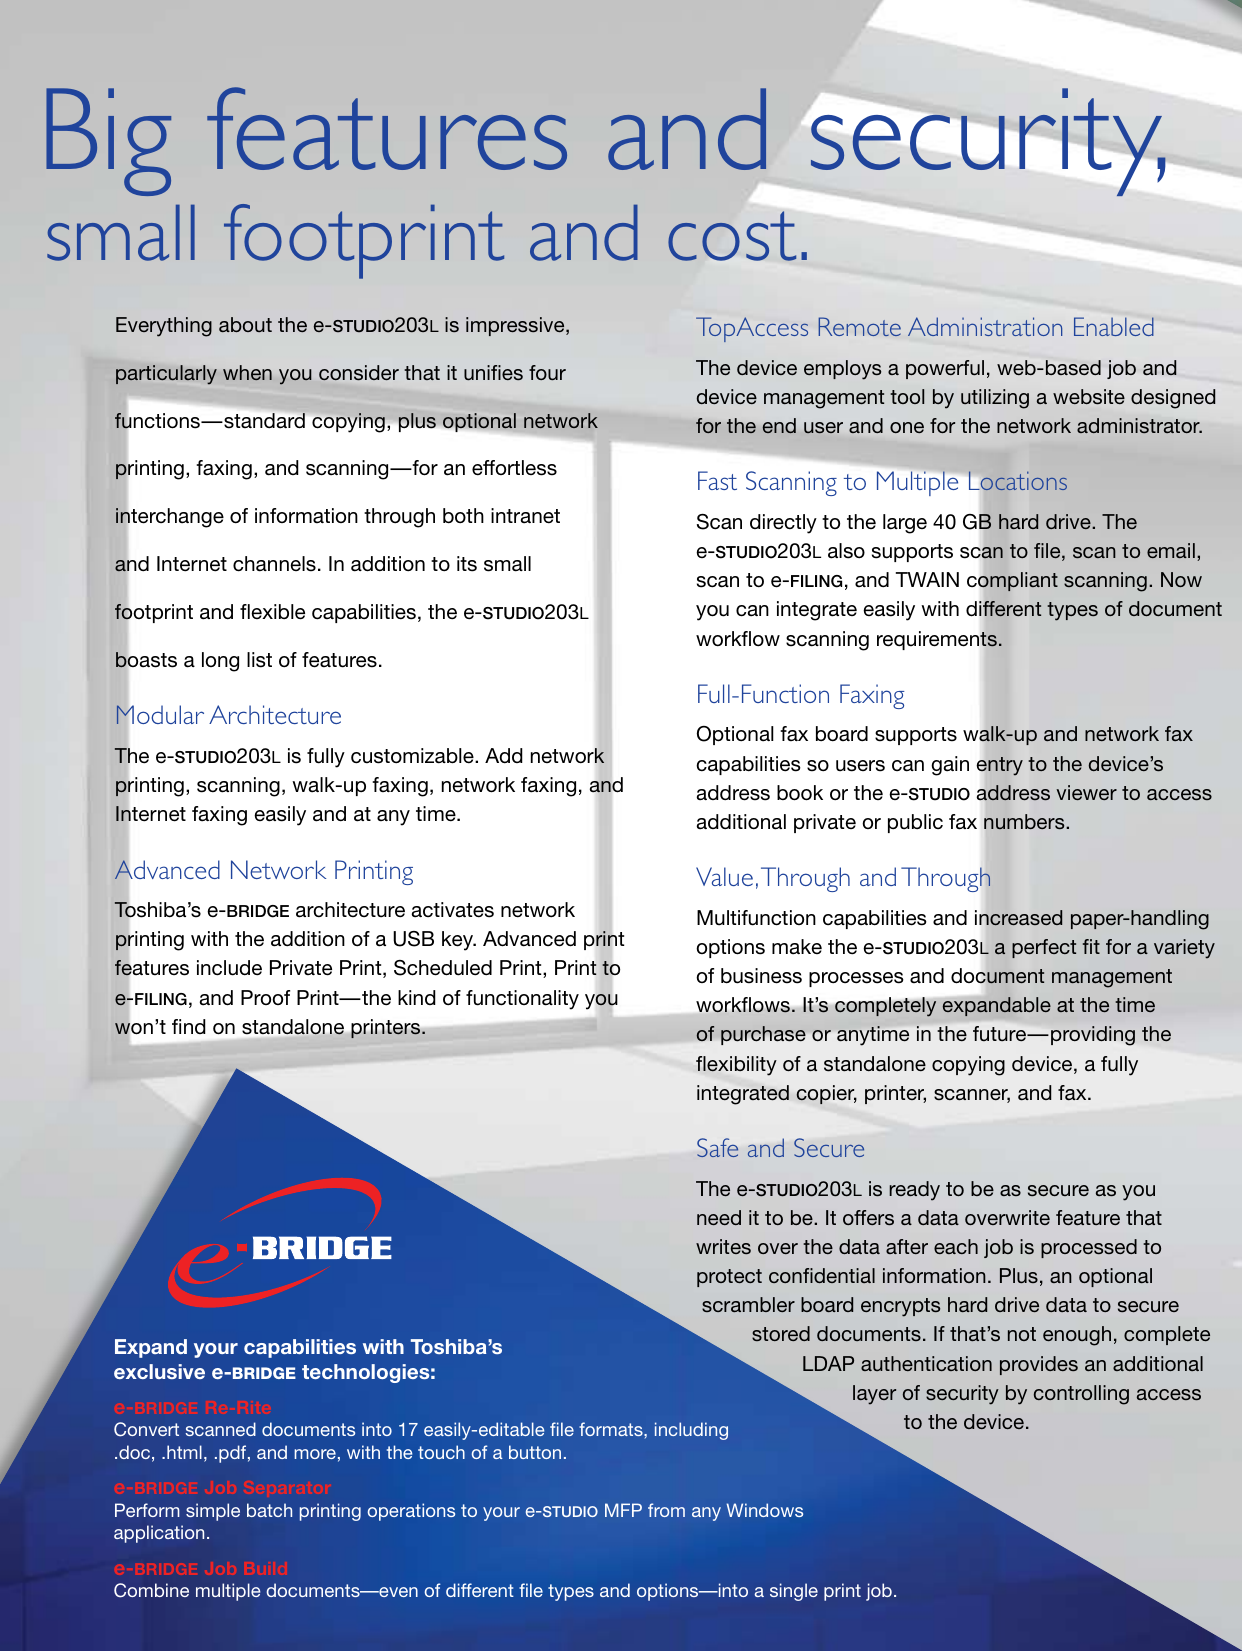 Page 6 of 8 - Toshiba  If Not Then 203L Brochure